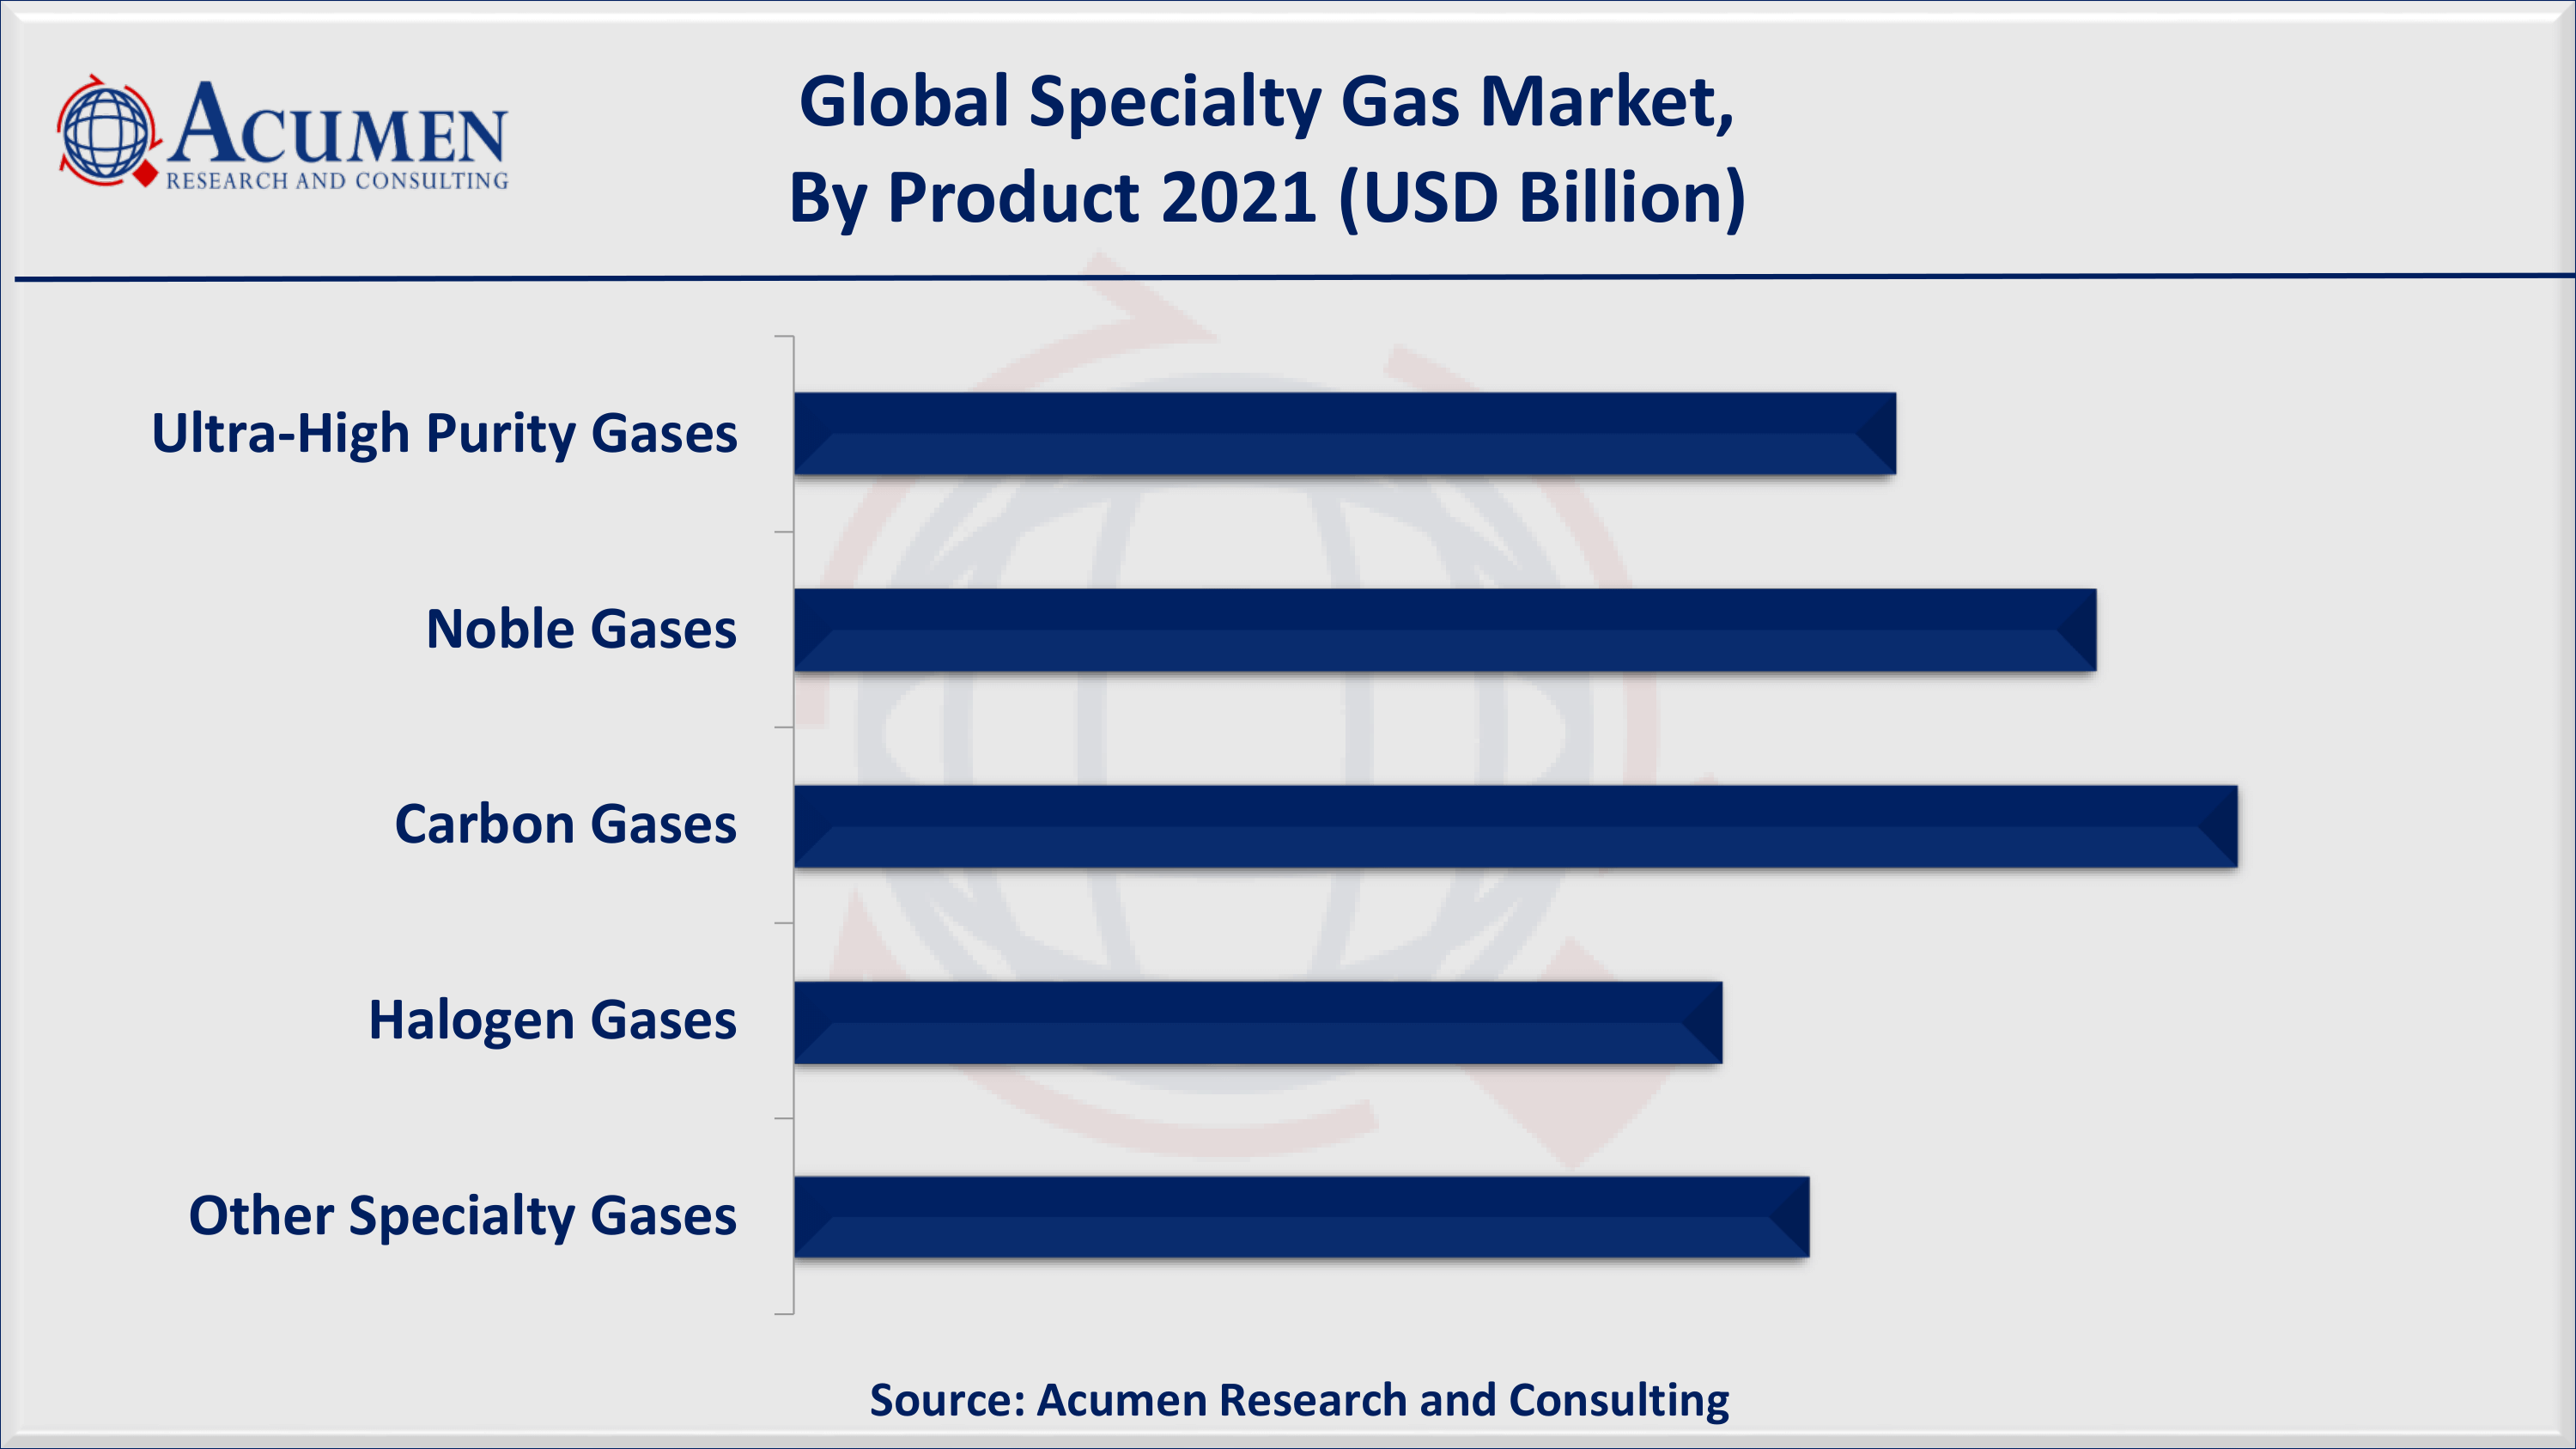 Based on product, carbon gases accounted for approx 26% of the overall market share in 2021